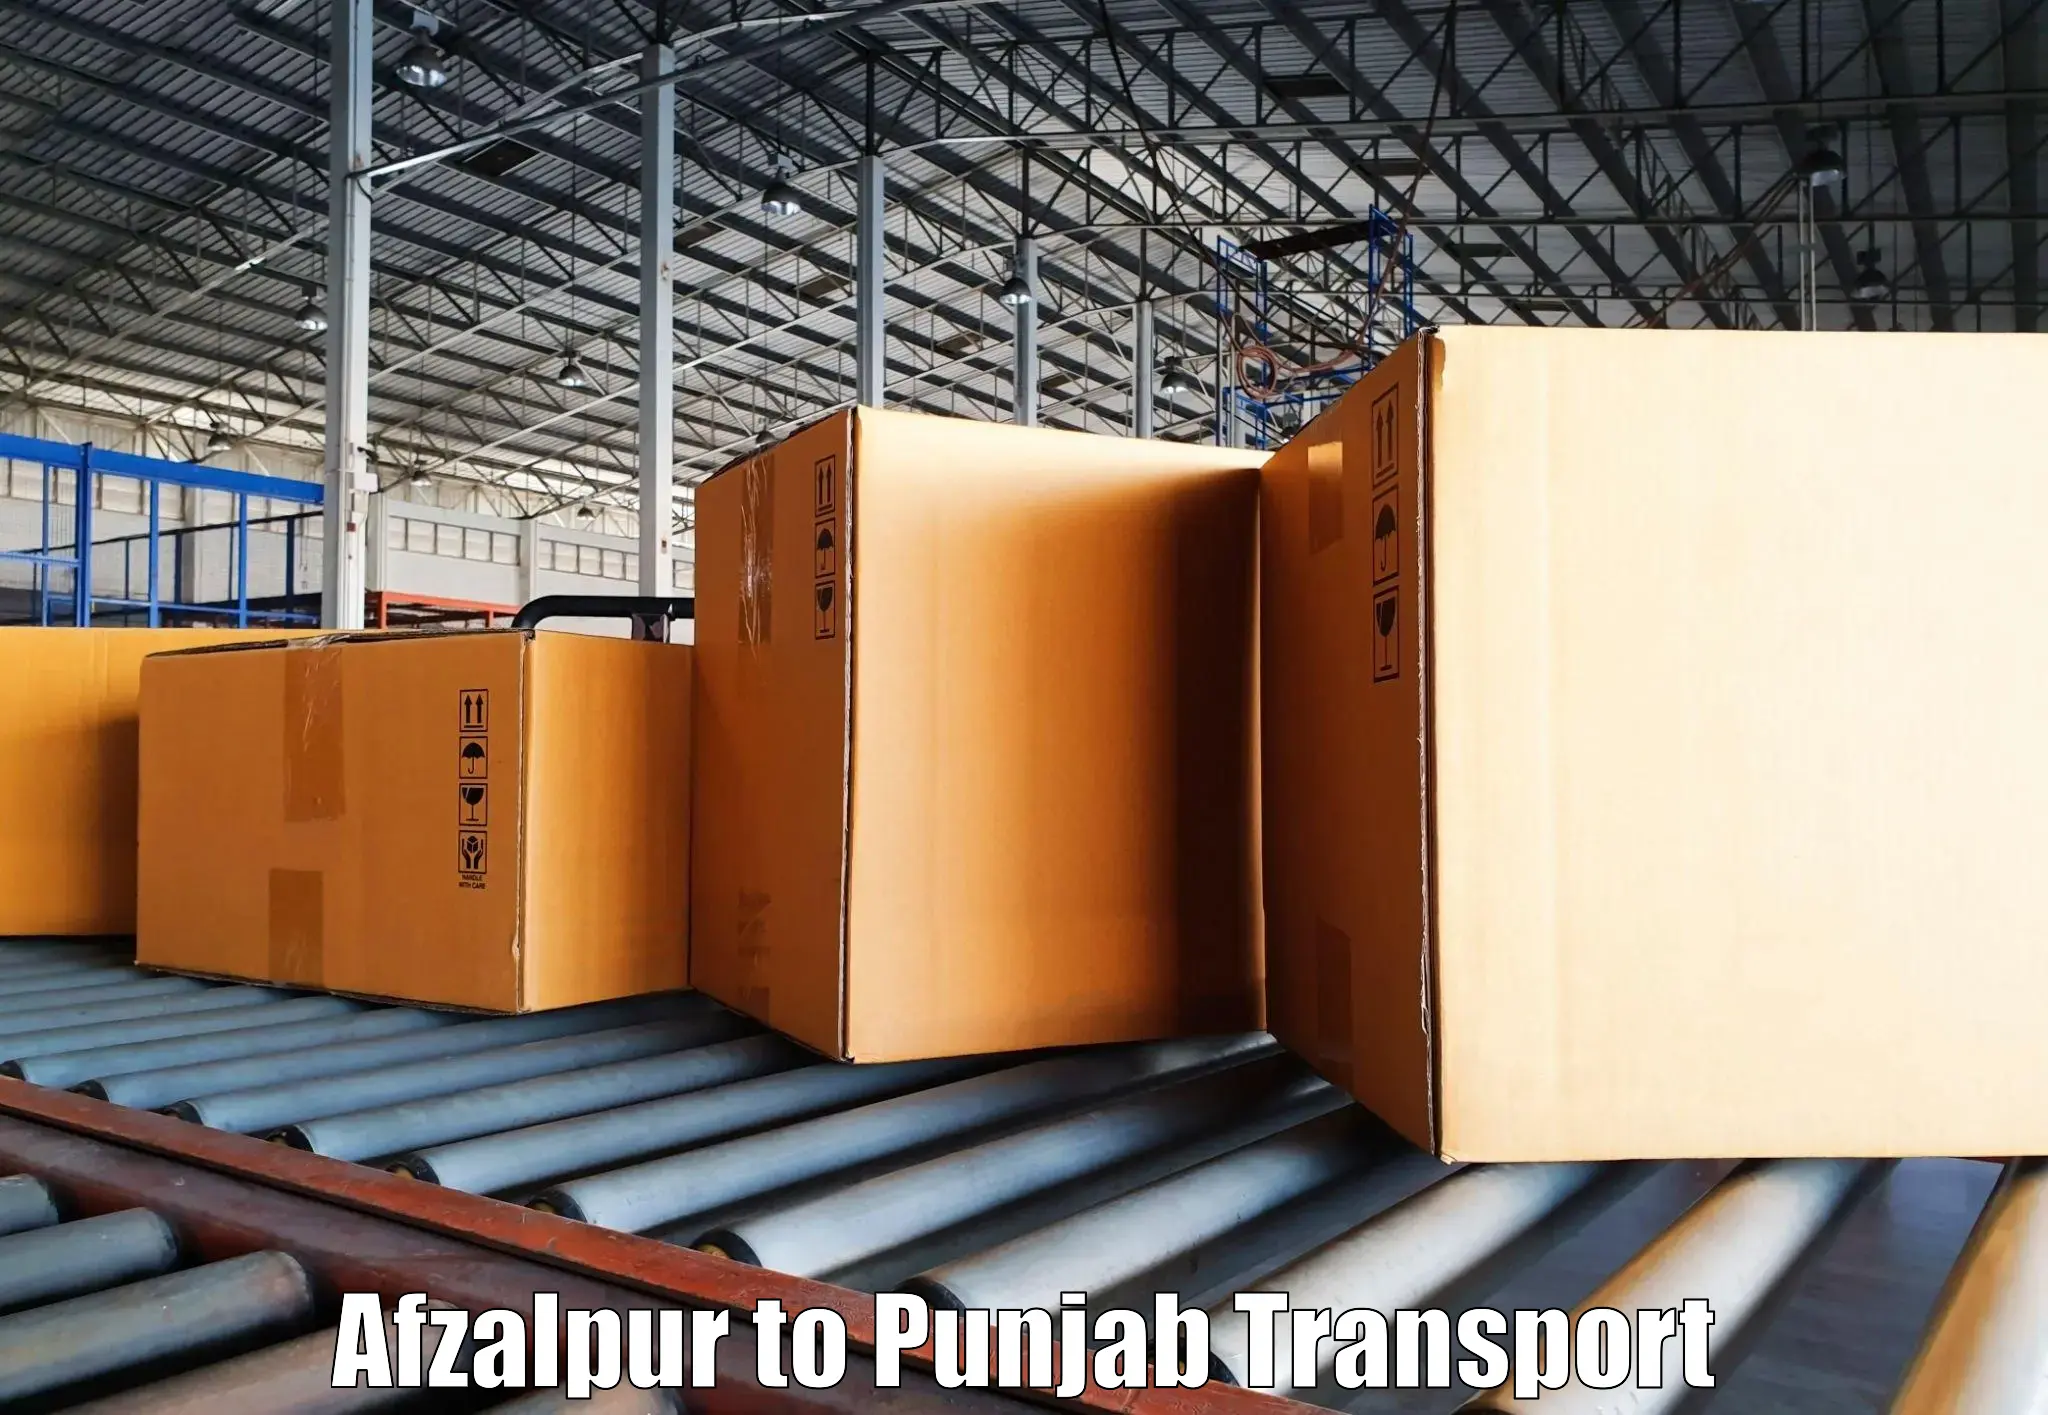 Express transport services Afzalpur to Sultanpur Lodhi